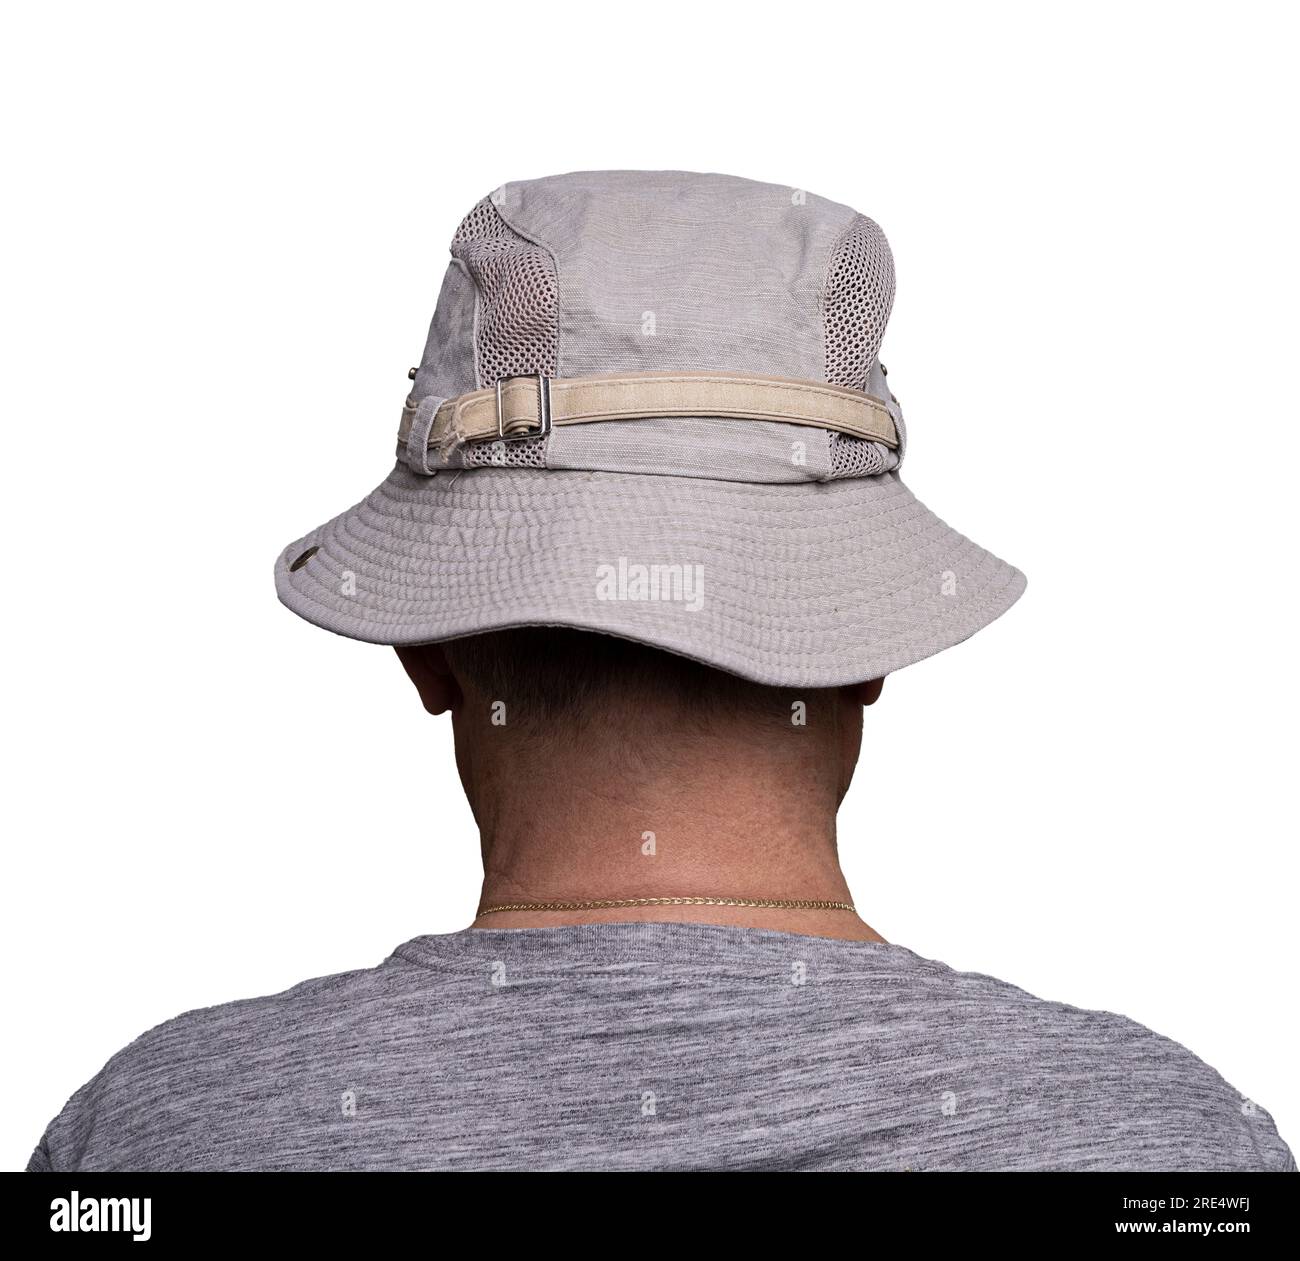 a man from behind with a wide-brimmed beige hat Stock Photo